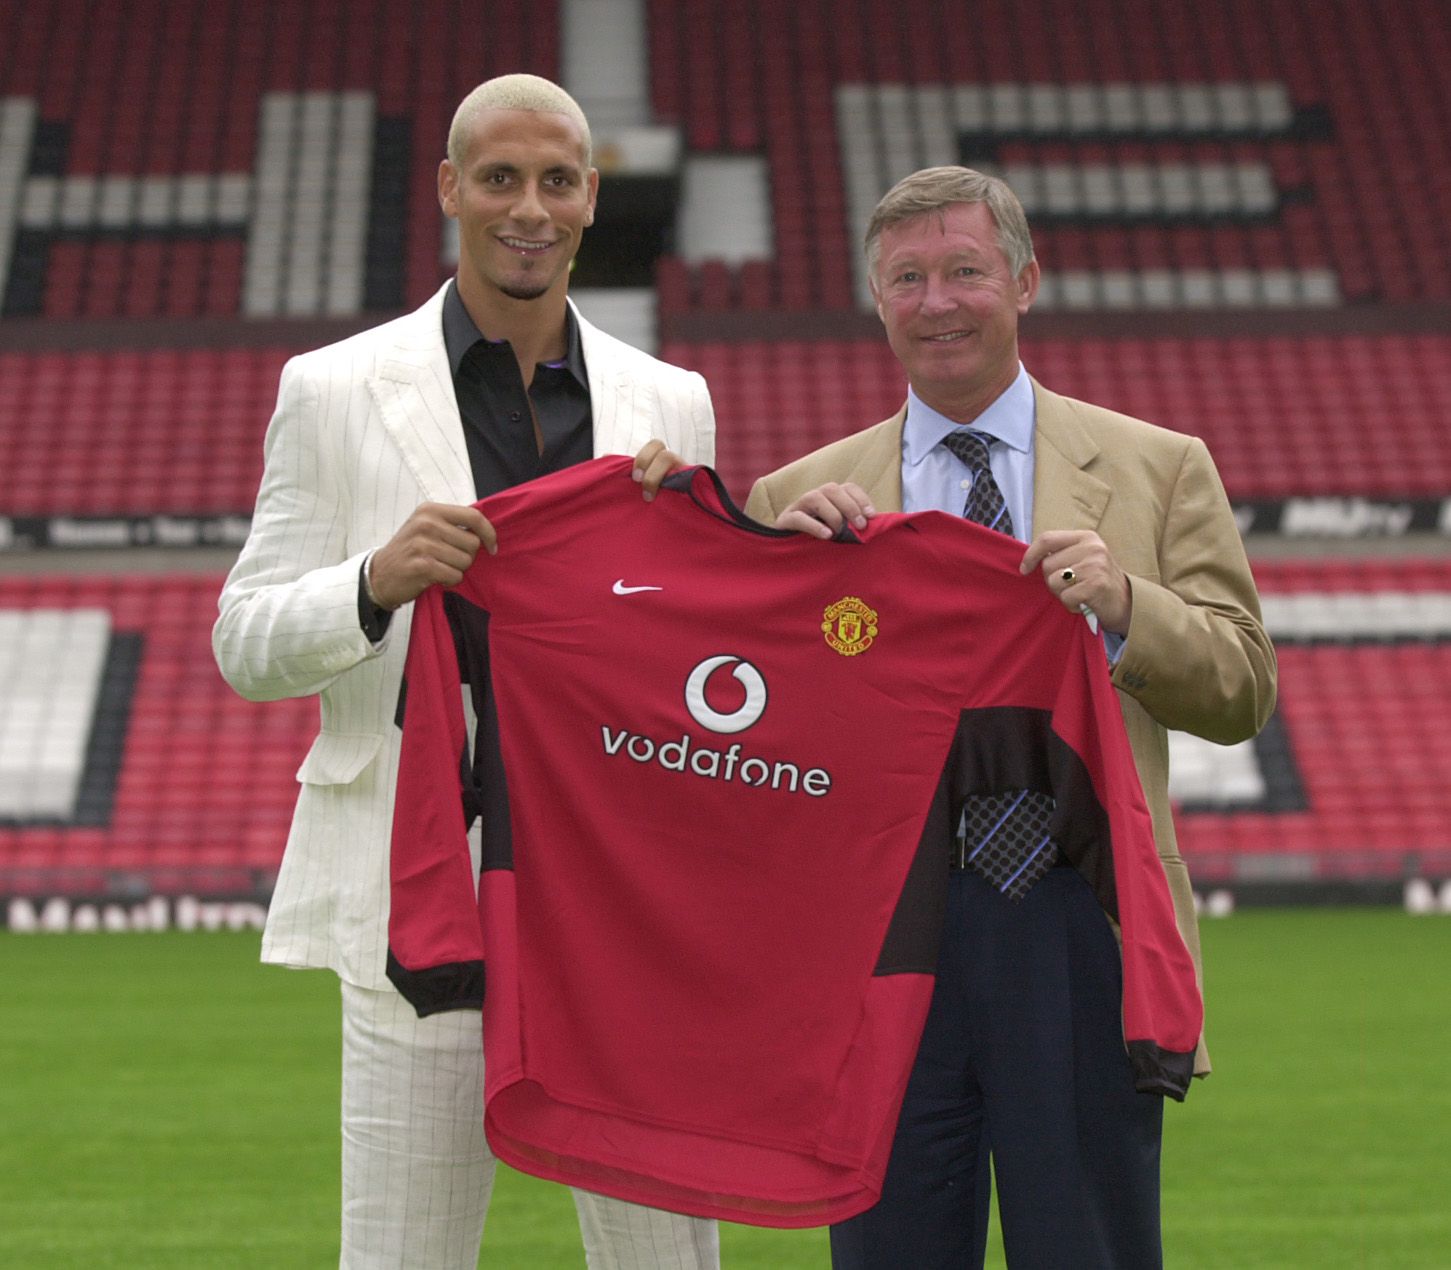 Rio Ferdinand July 2002 Manchester United's new signing walks with manager Alex Ferguson (right) at the club's Old Trafford ground. The 23-year-old former Leeds defender smashed British transfer fee records when he moved across the Pennines to become the sixth most expensive footballer of all time  

Rio signed for £29,100,000.   Only the 3rd player to be over £20m in the uk transfer market.

Picture taken 22nd July 2002